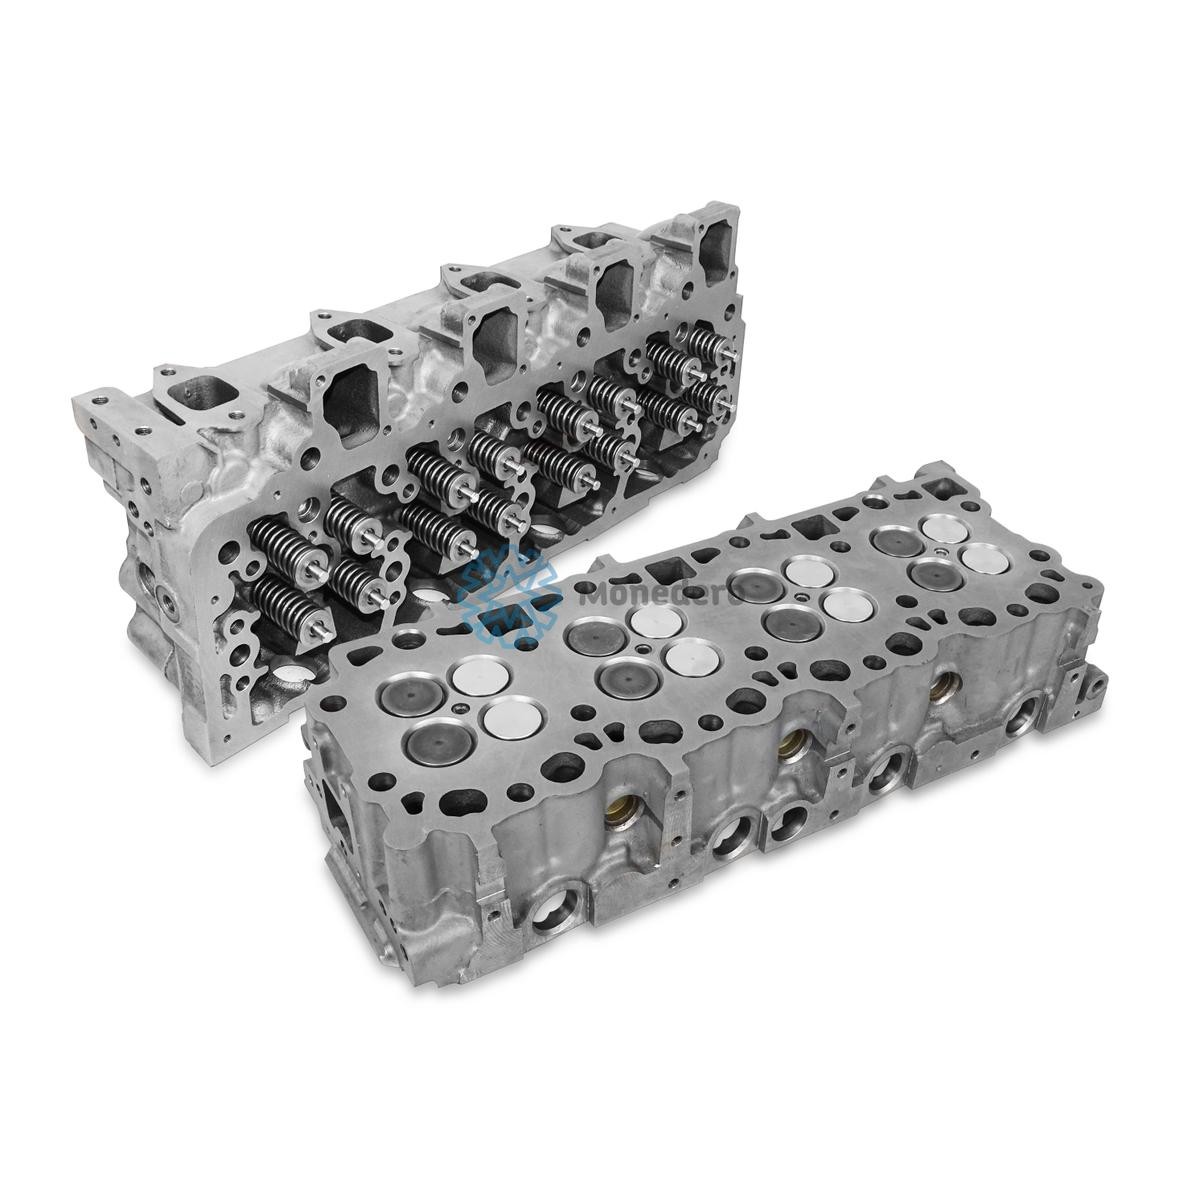 MONEDERO with valves, with valve springs, without camshaft(s) Cylinder Head 60012100002 buy